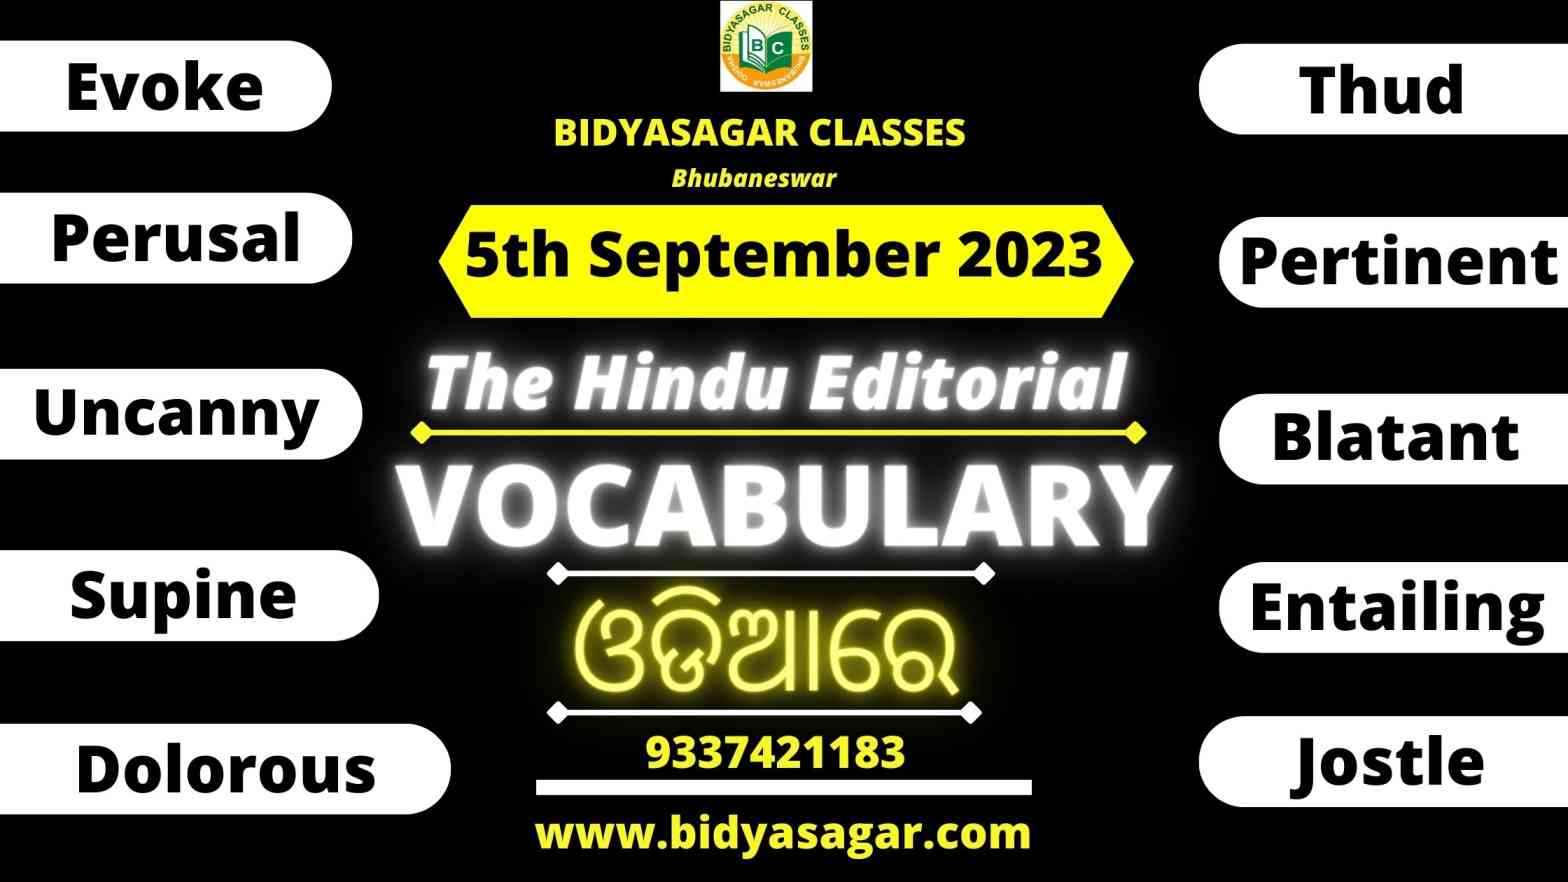 The Hindu Editorial Vocabulary of 5th September 2023